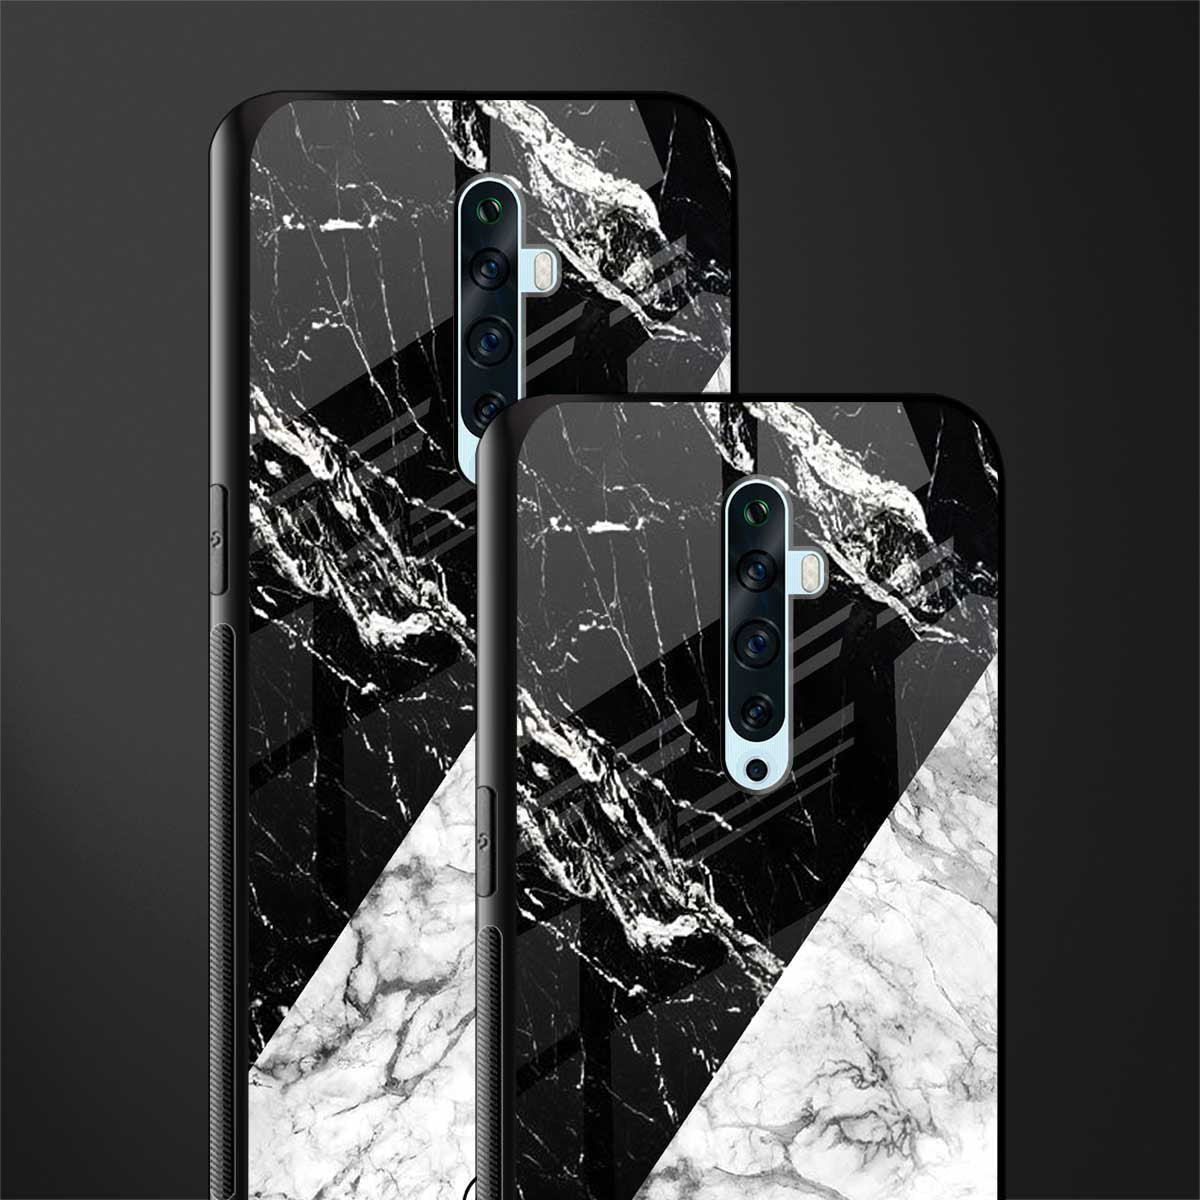 fatal contradiction phone cover for oppo reno 2f